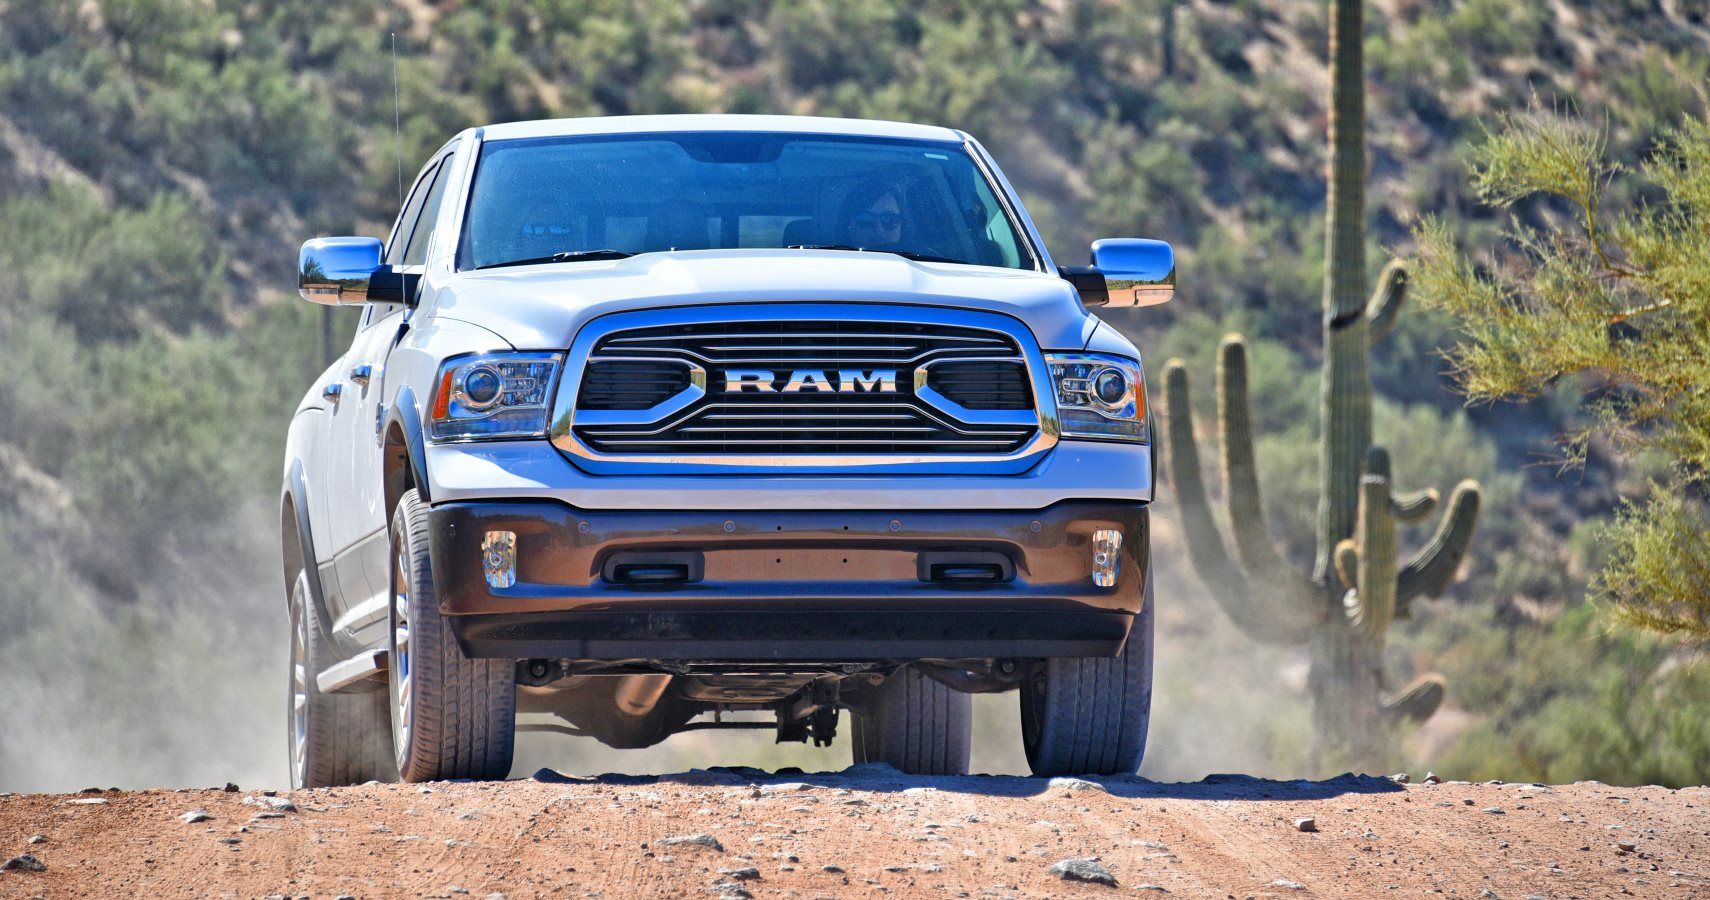 Over 410,000 Ram Trucks Recalled Over Faulty Tailgate Issue